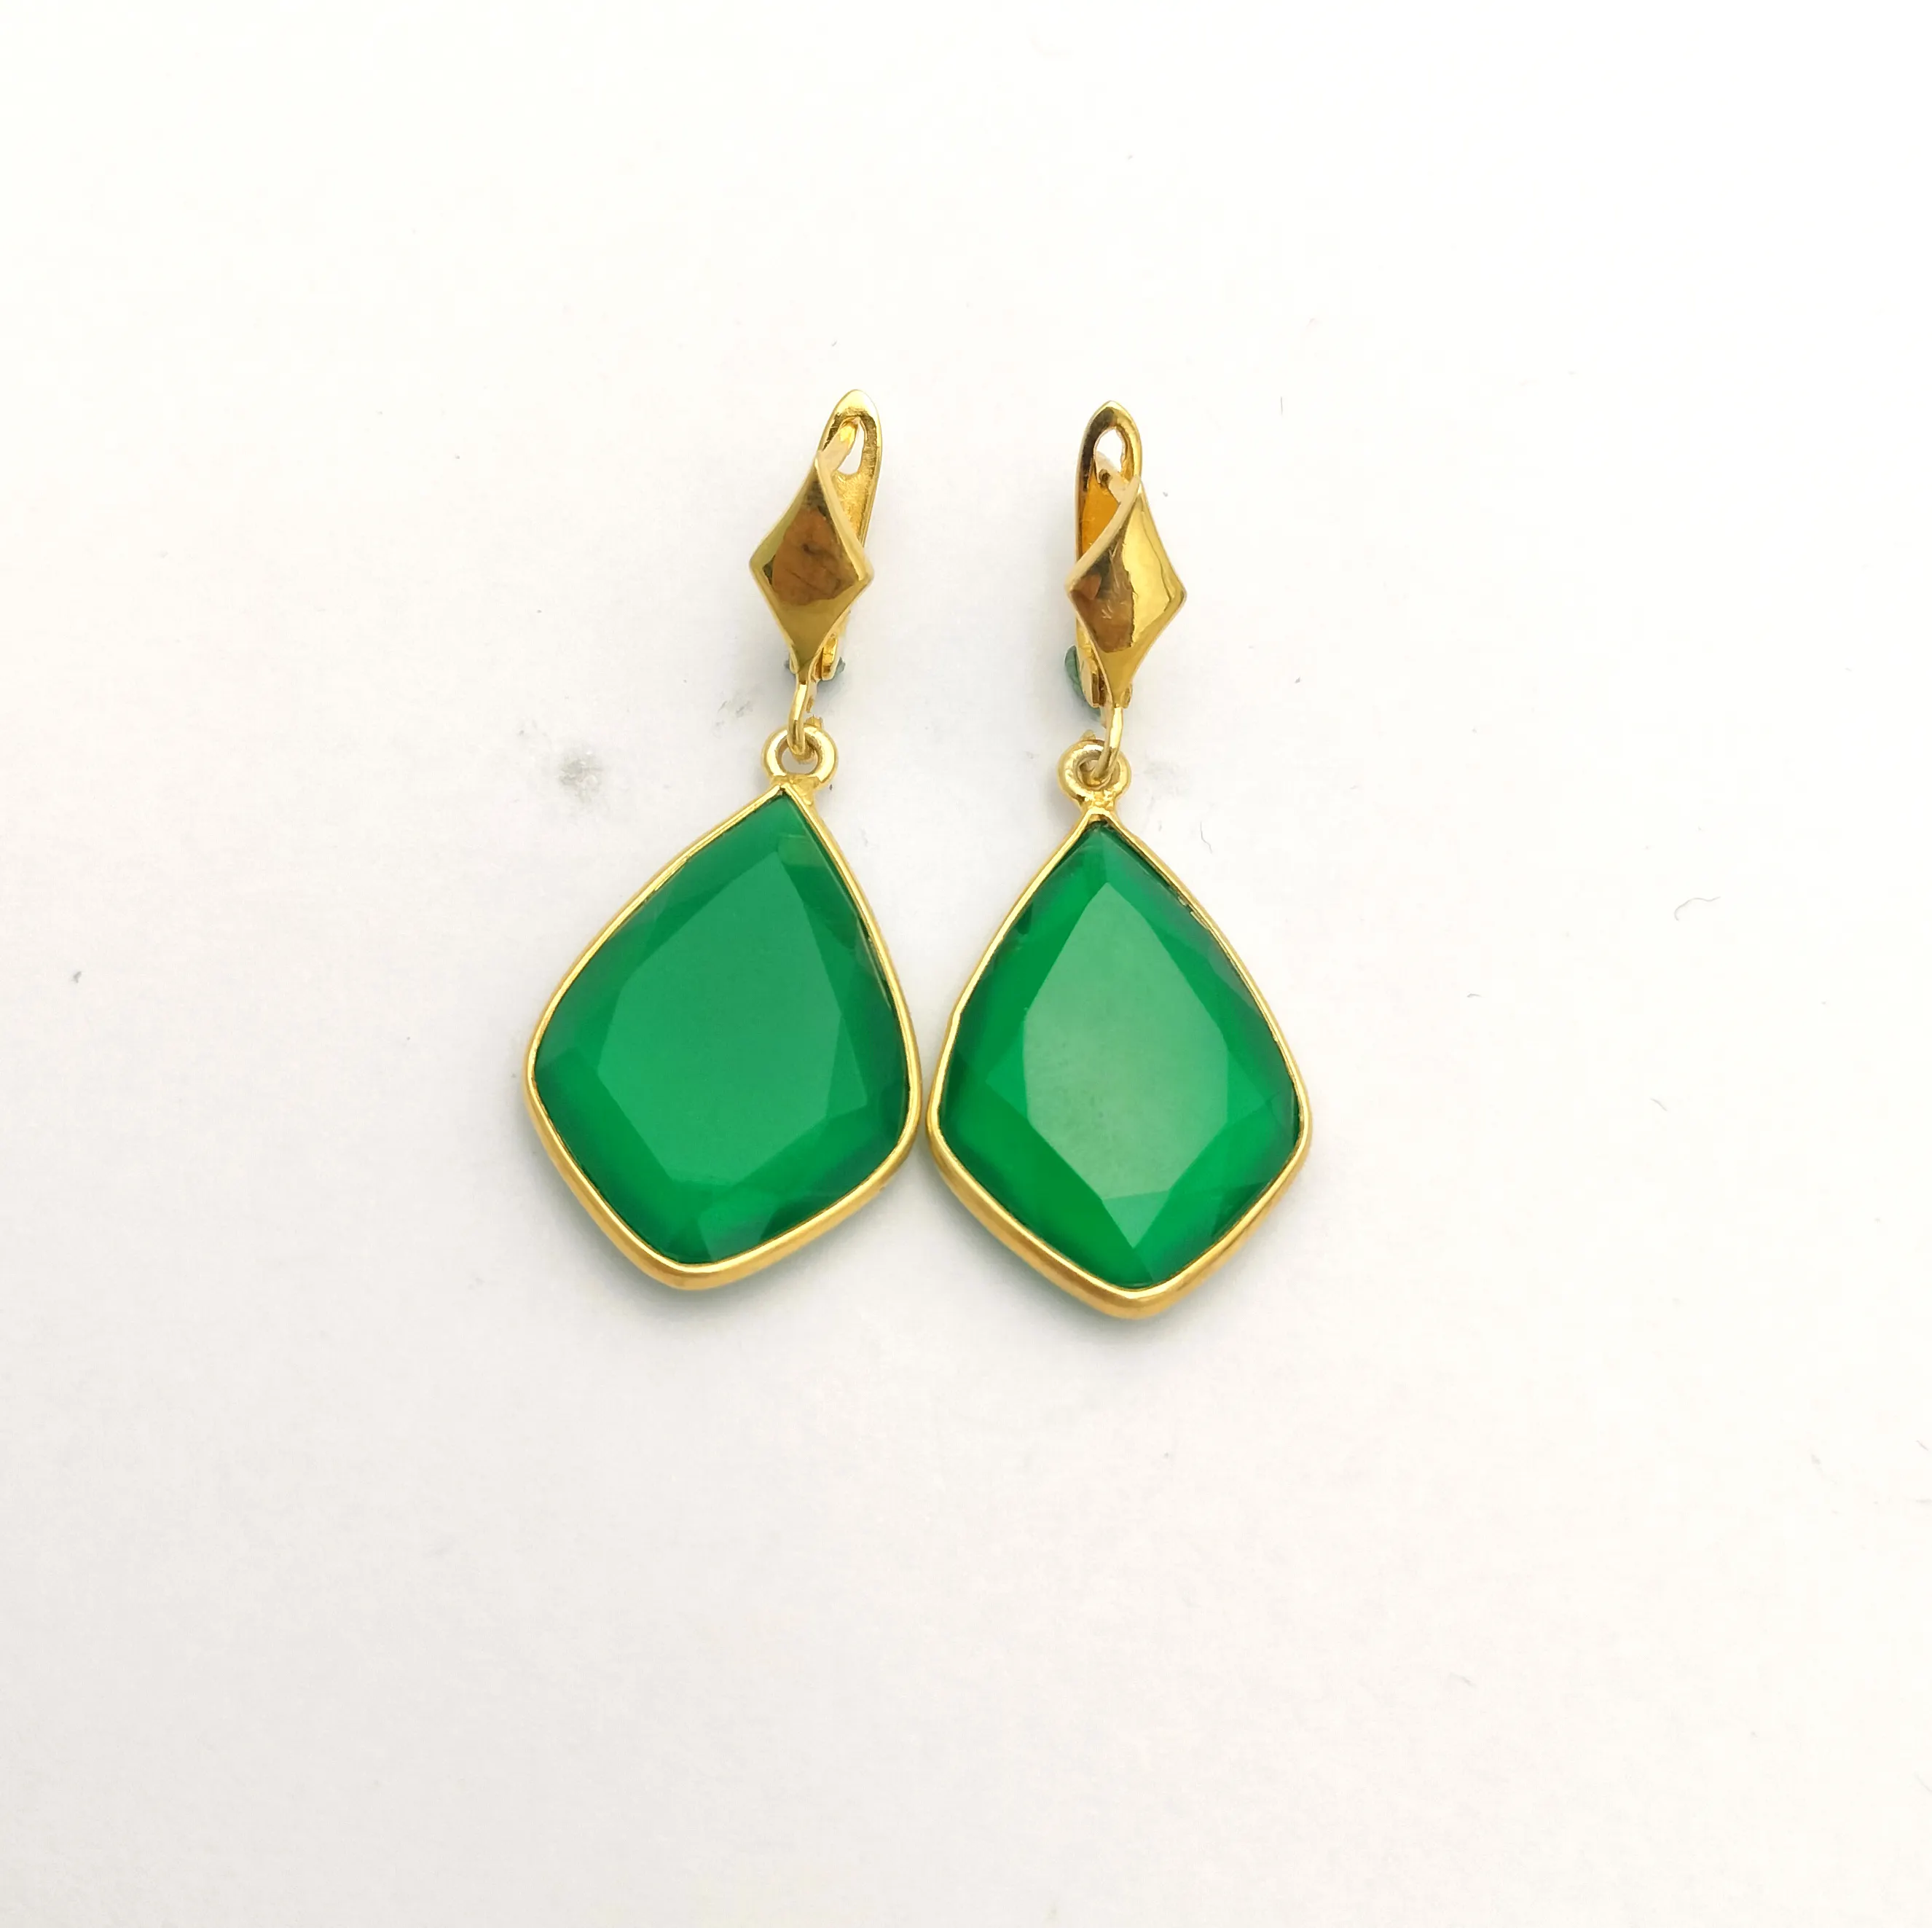 New Arrival Handmade 925 Sterling Silver Green Onyx Cut Stone Gold Plated Silver Earring For Women Best For Gifting Cute Girls